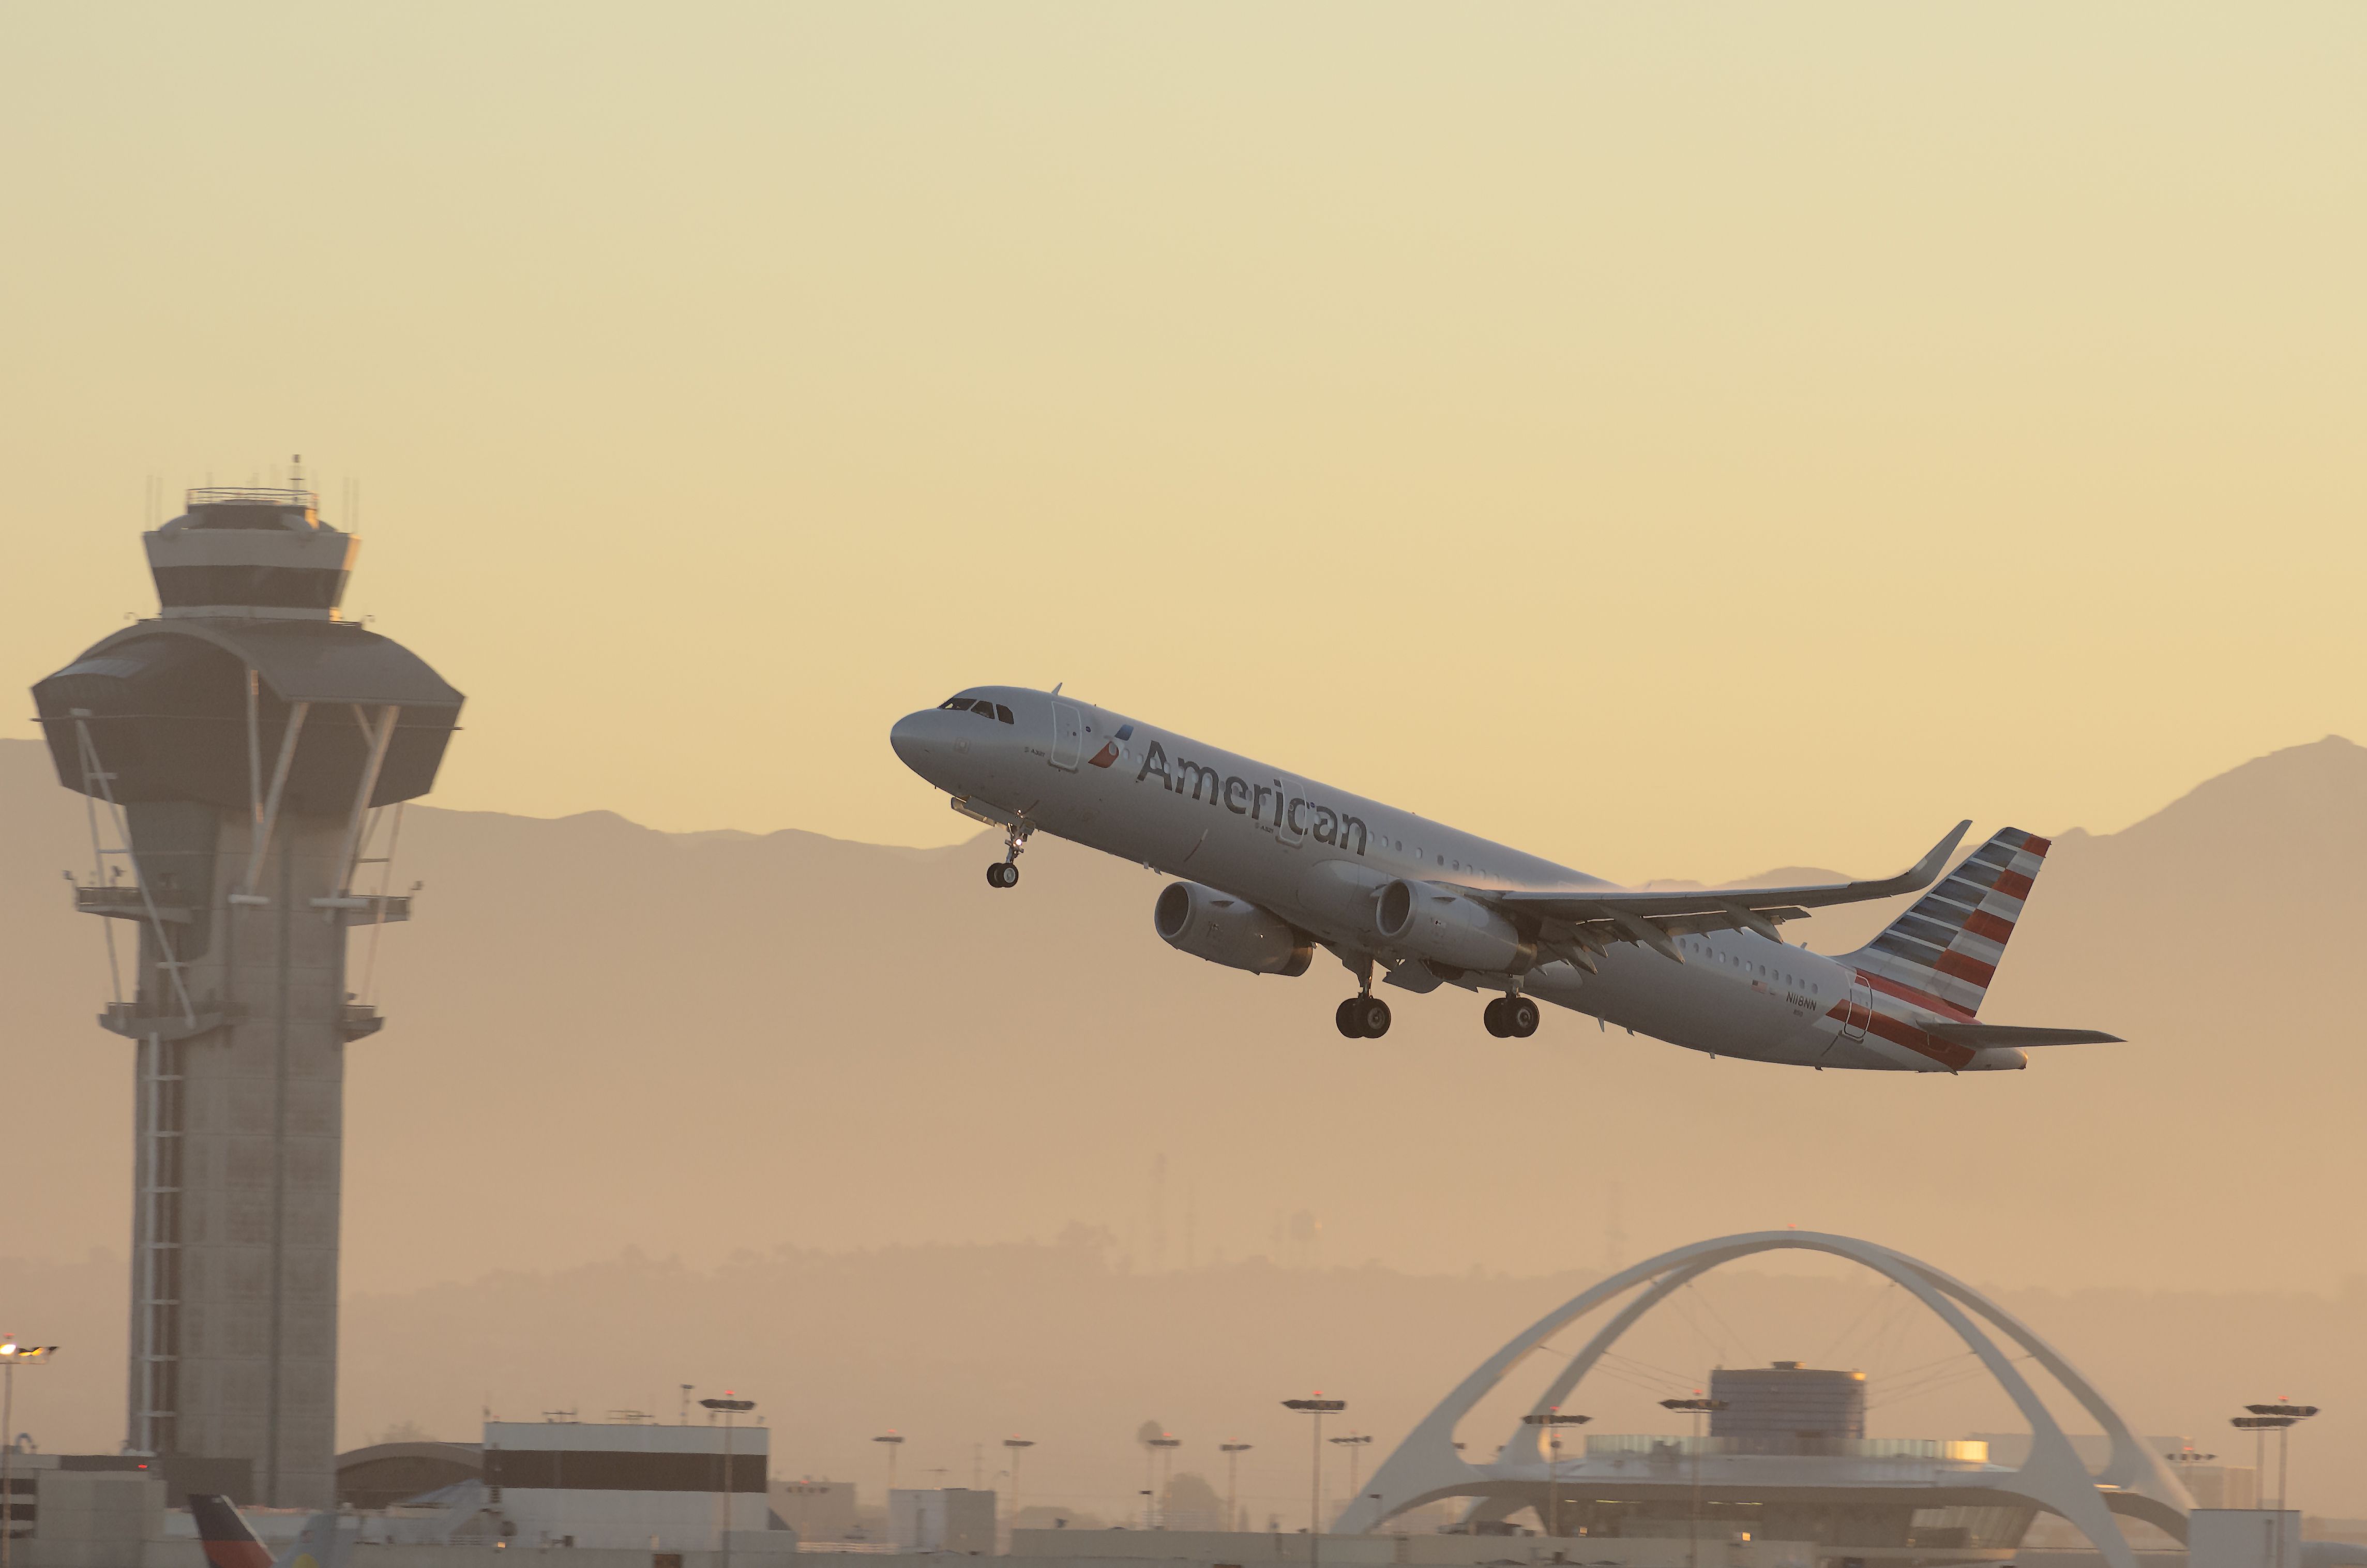 shutterstock_1370553083American Airlines Airbus A321 shown taking off from the Los Angeles International Airport, LAX, at sunrise..